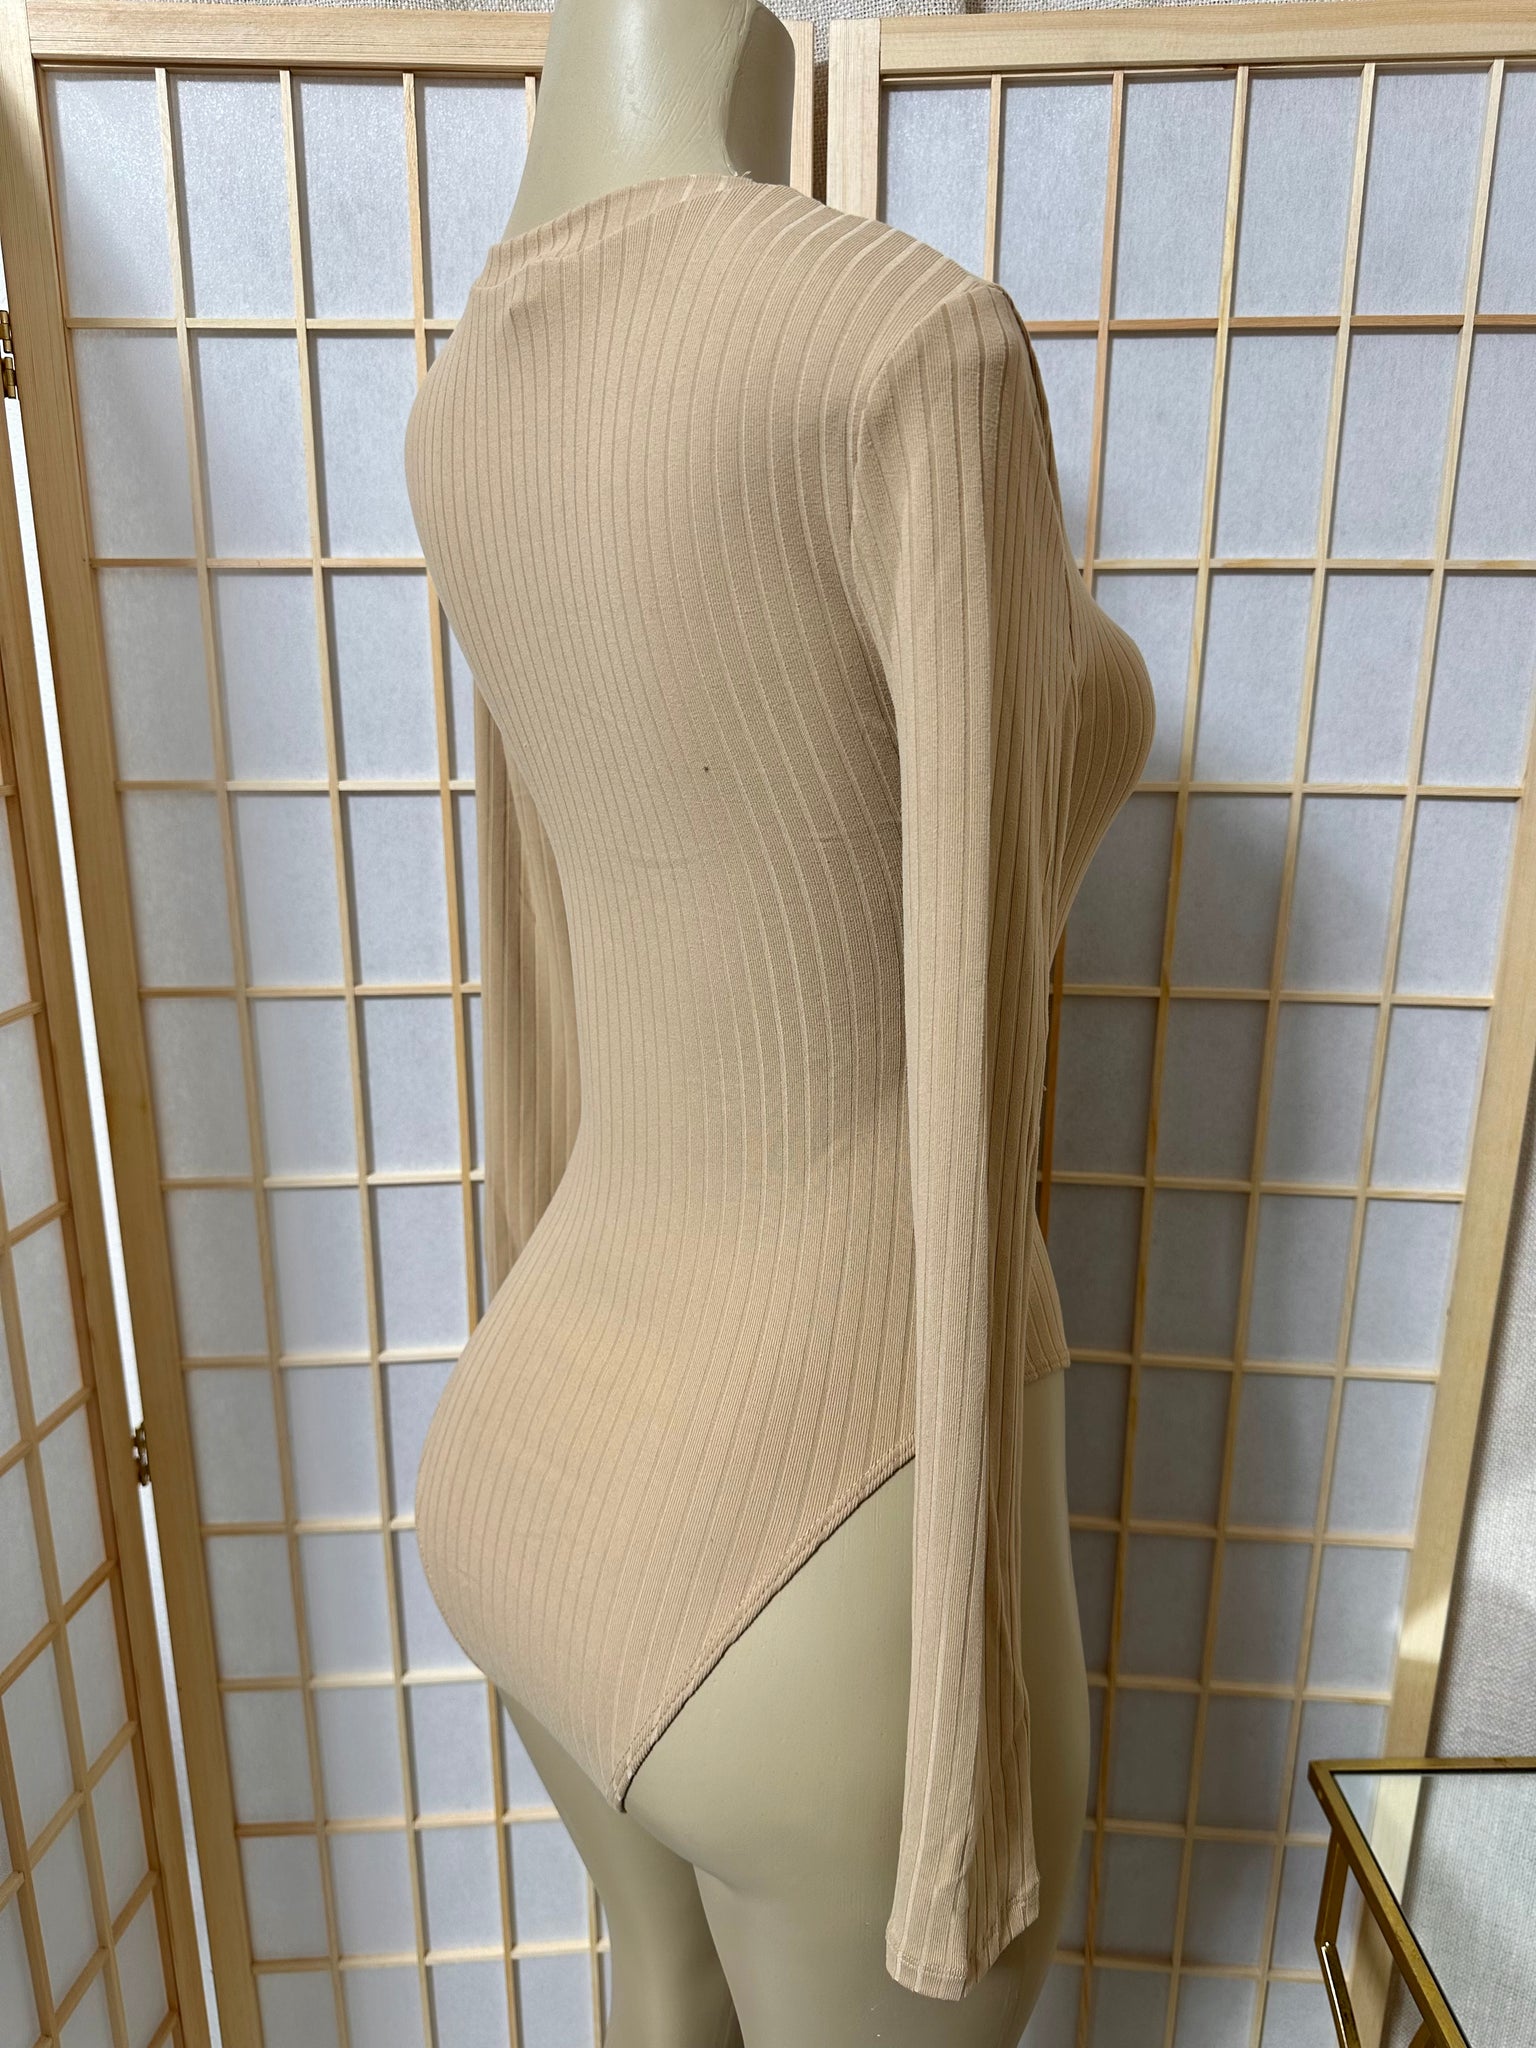 The “Nicole” Ribbed Bodysuit In Nude